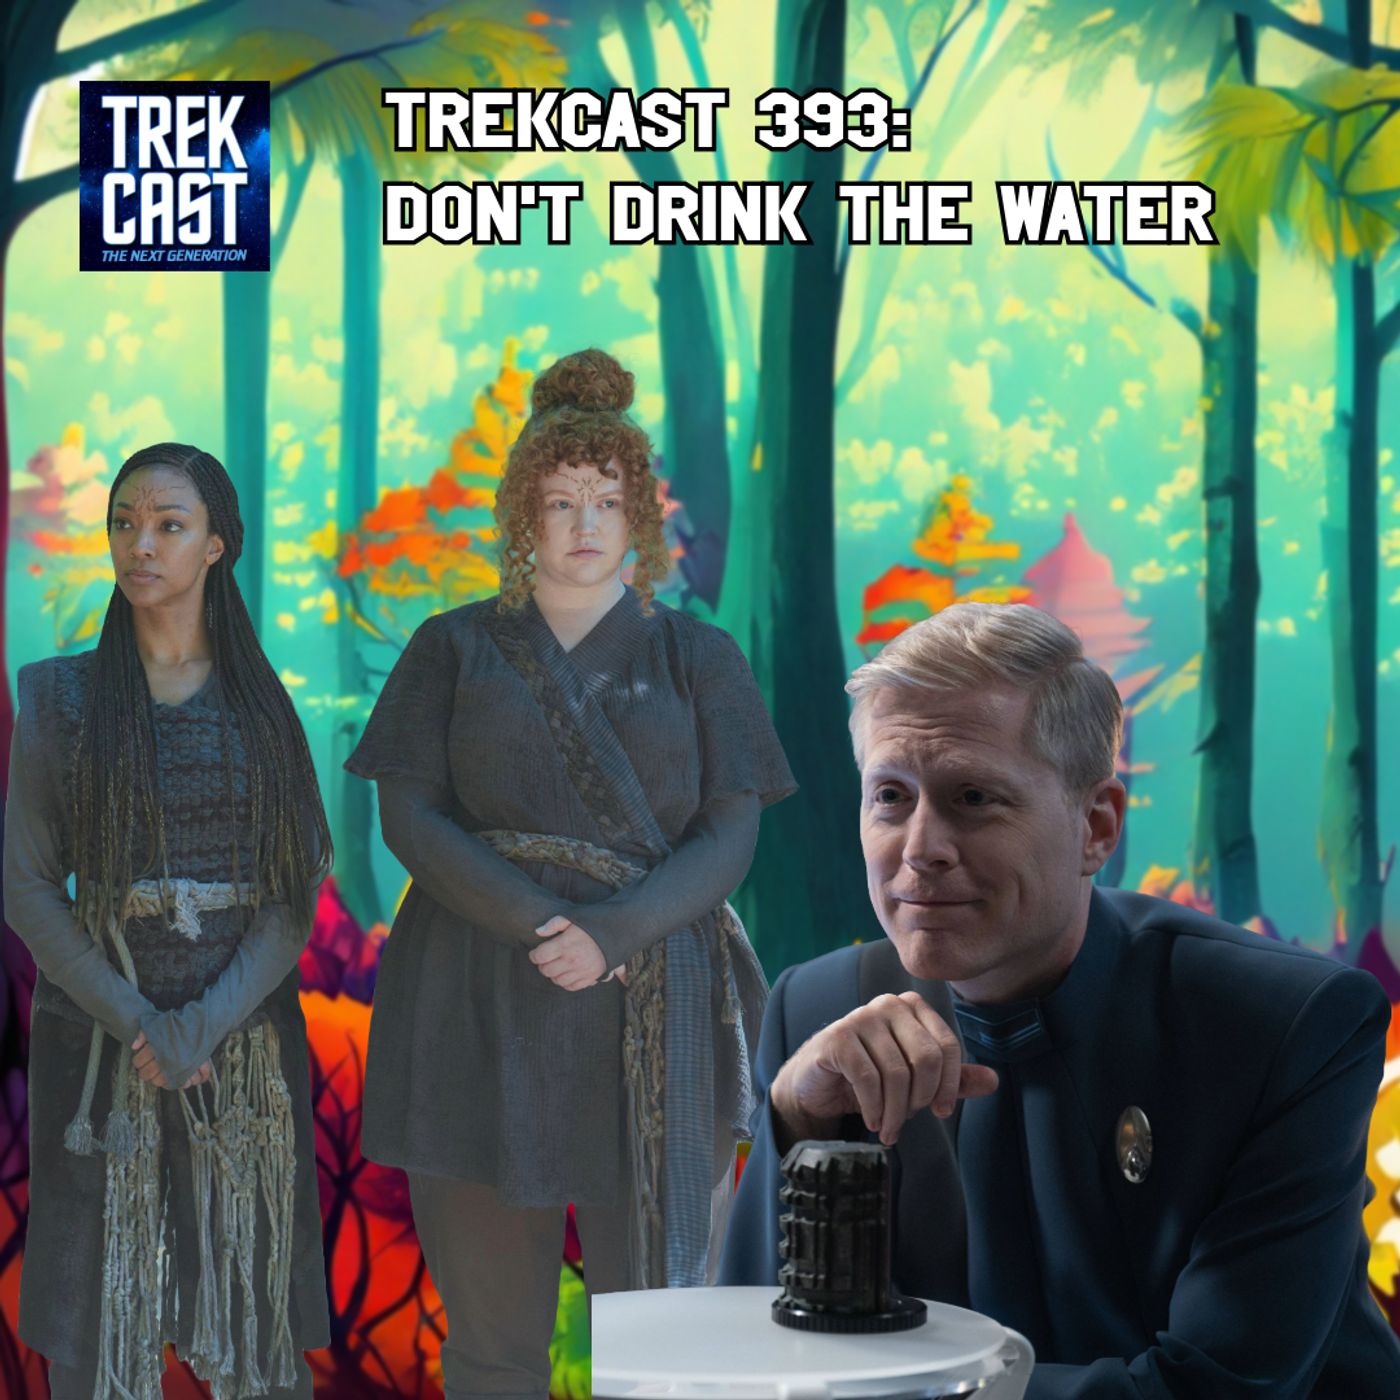 Trekcast 393: Don’t Drink the Water